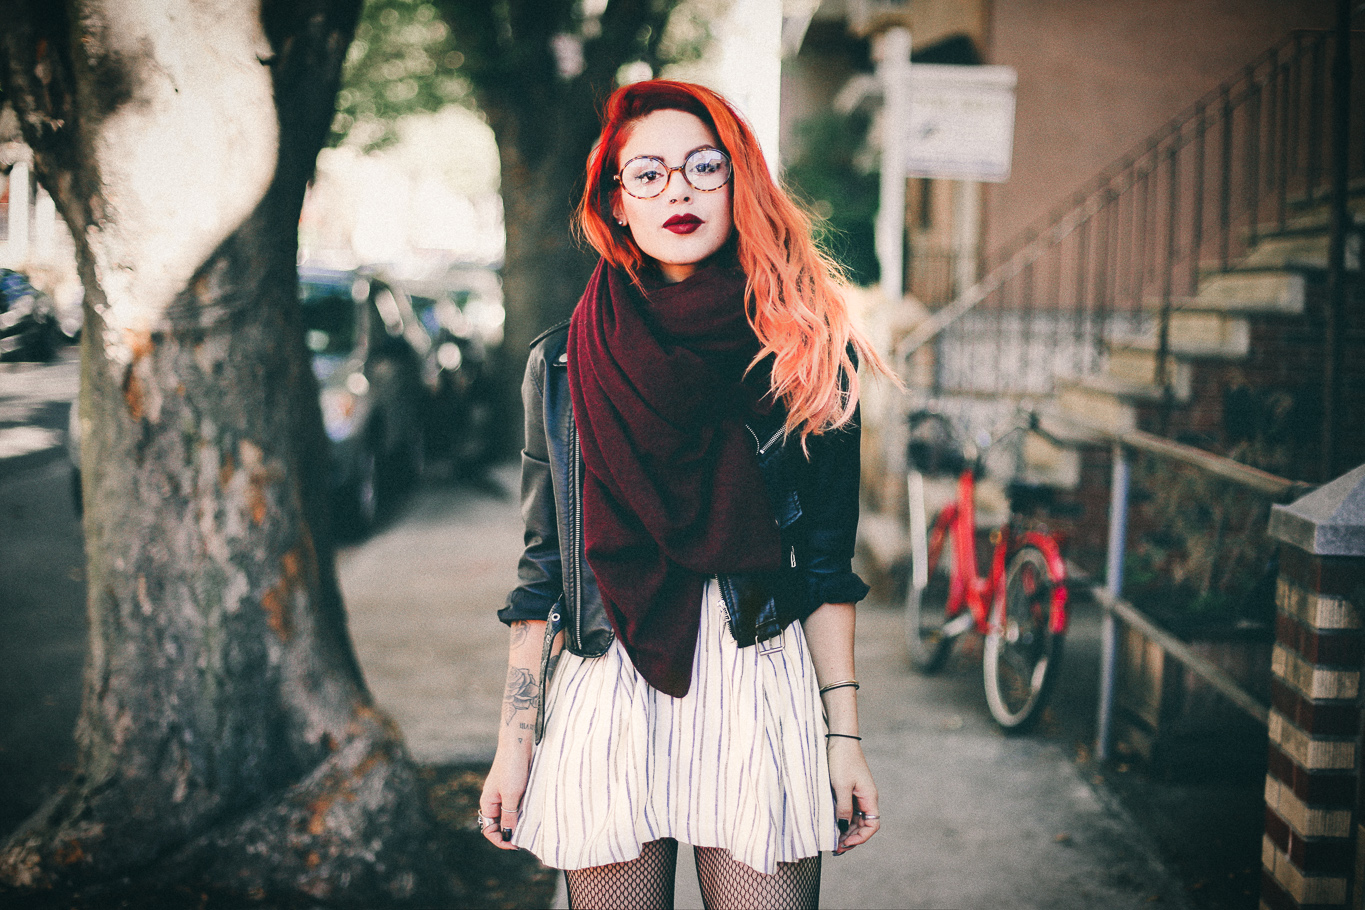 Le Happy wearing Joa striped skater dress and burgundy scarf with a biker jacket